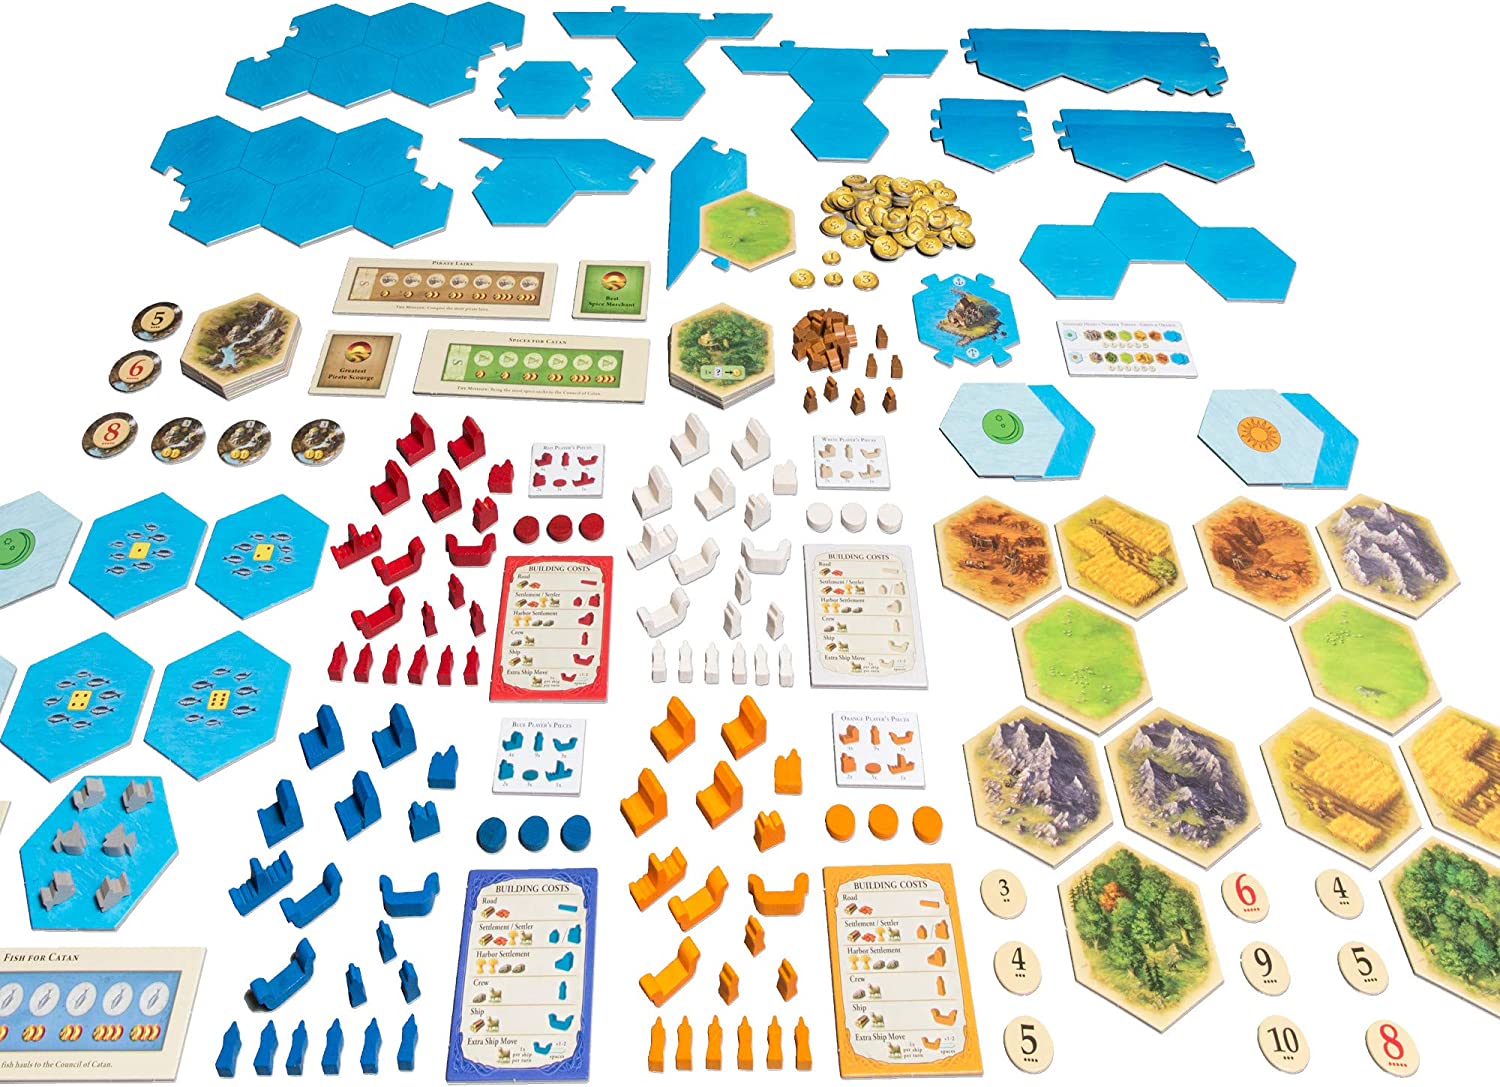 Can't get enough Catan? Check out these Catan Expansions and Editions. 5